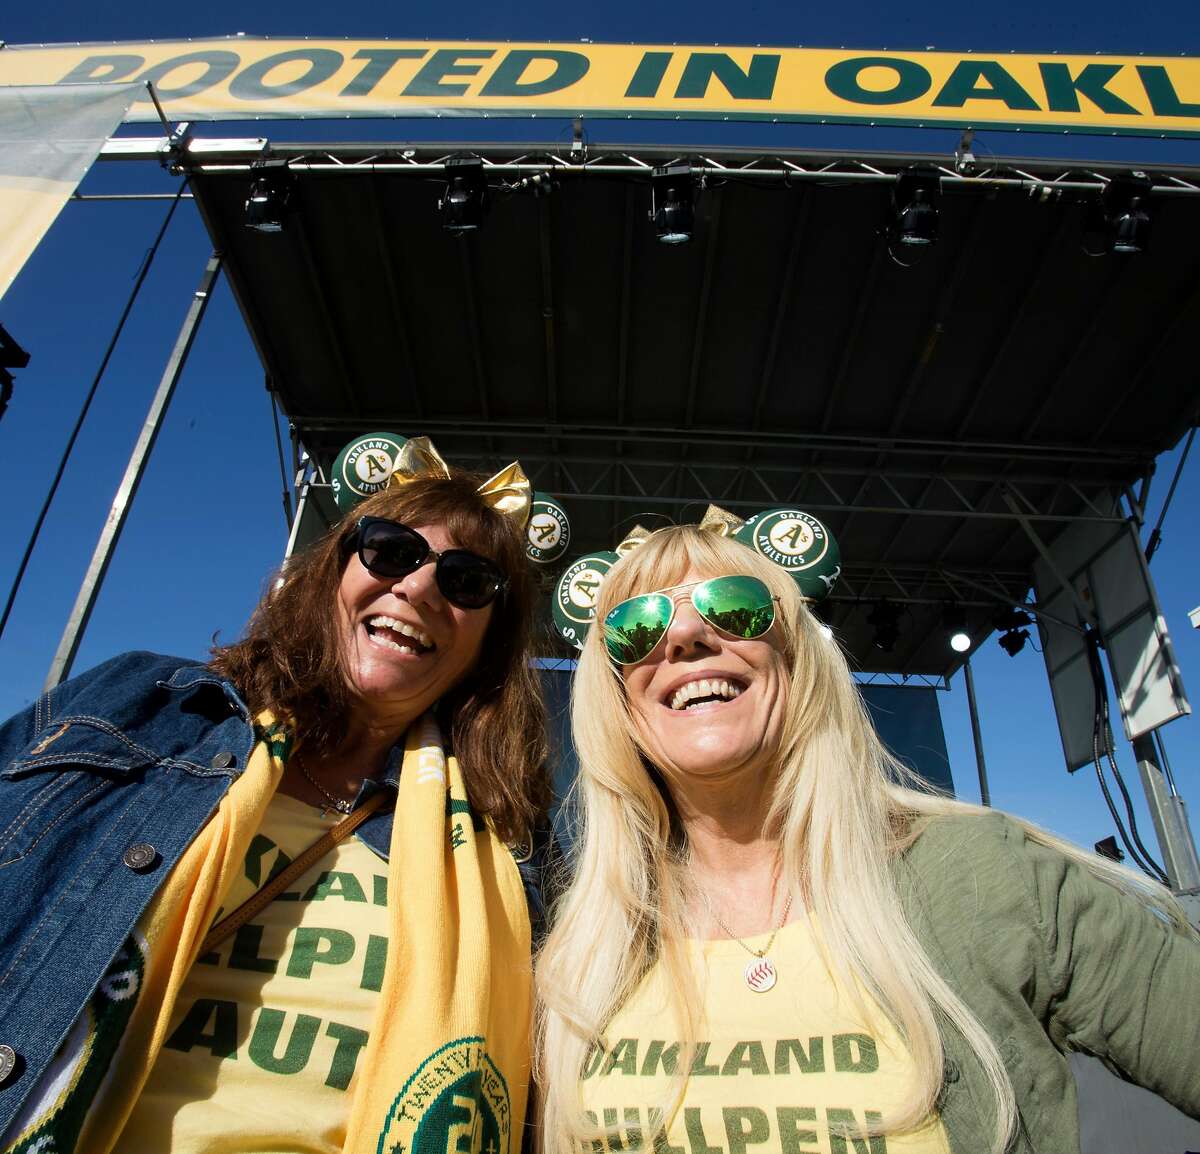 Alicia Puccinelli of San Jose, left, and Ane Smith of Livermore, Calif show off their A's paraphernalia during Oakland Athletics Fan Fest at Jack London Square on Saturday, Jan. 27, 2018 in Oakland, Calif.